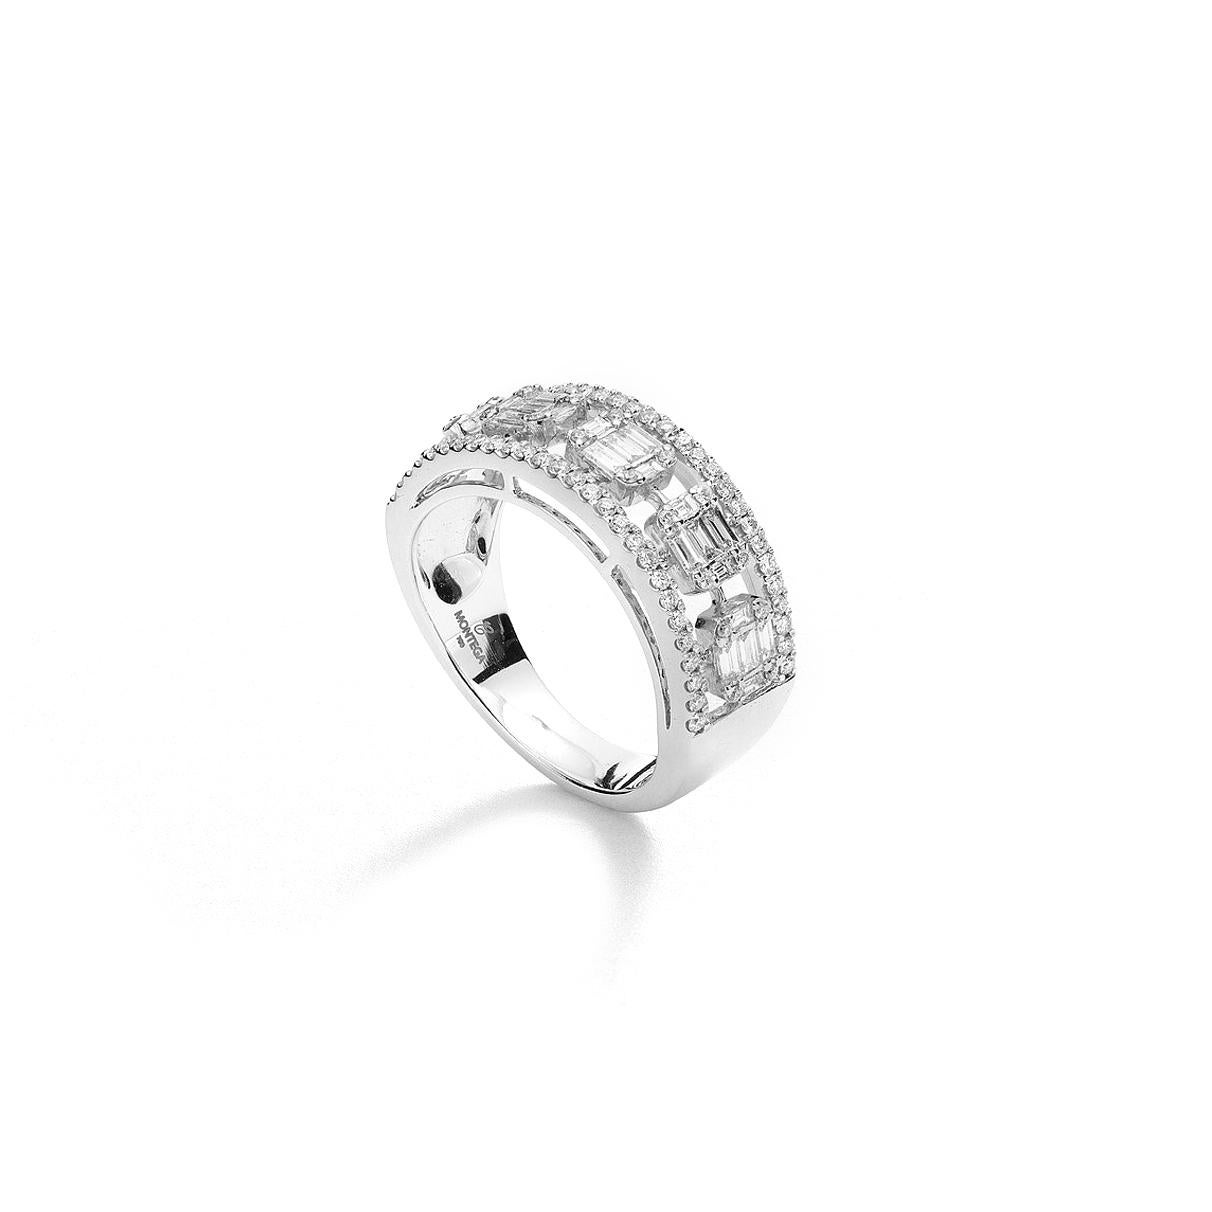 Ring in 18kt white gold set with 74 diamonds 0.31 cts and 25 baguette cut diamonds 0.46 cts